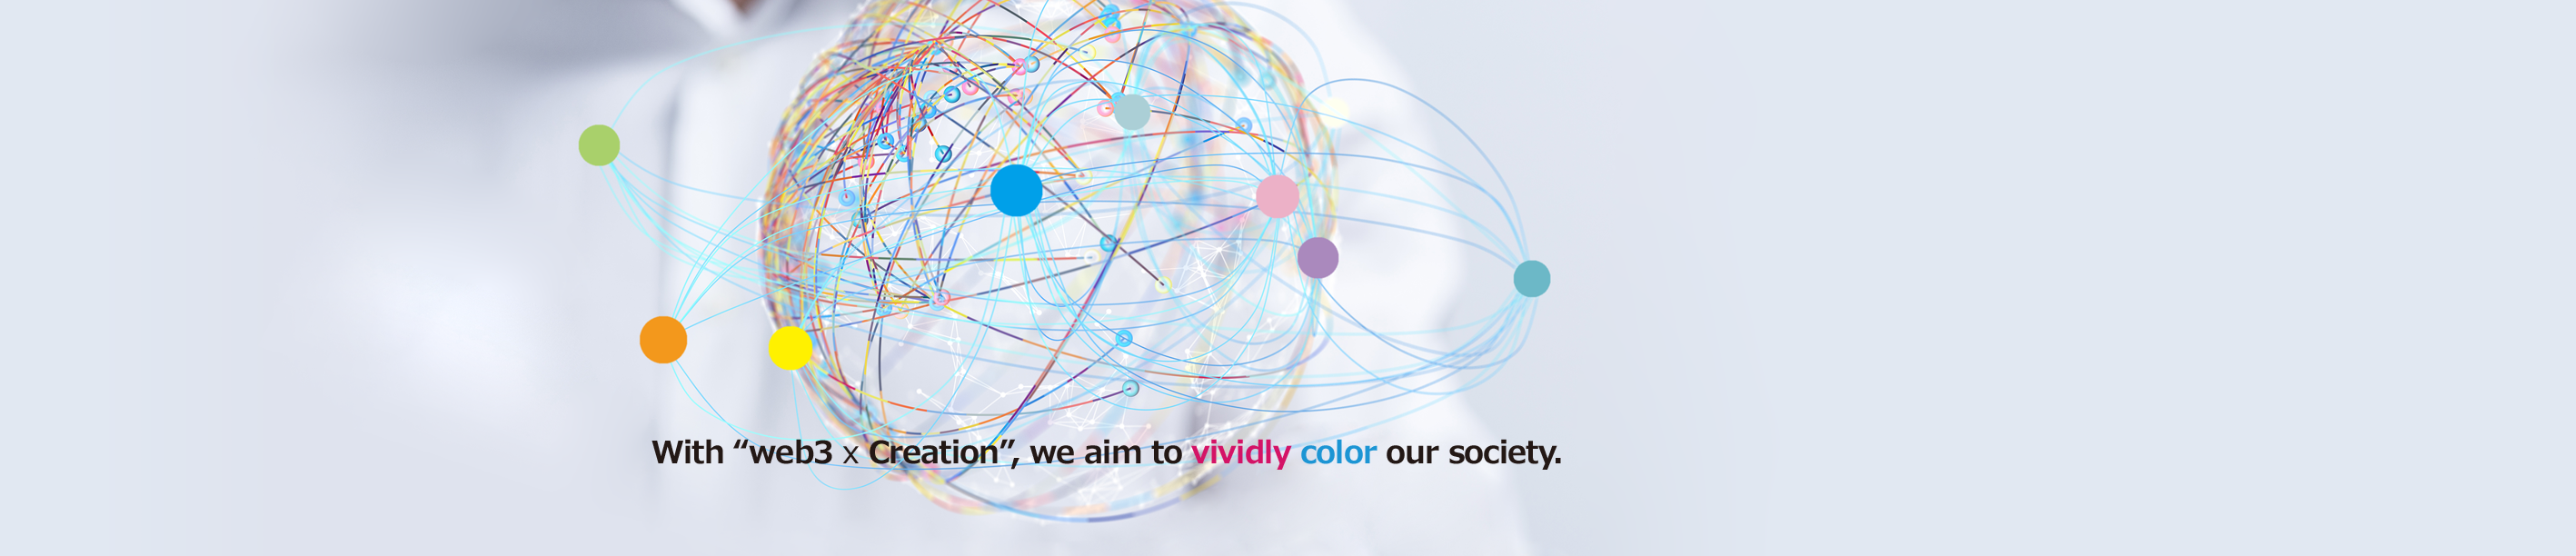 With web3 x creation, we aim to vividly color our society.